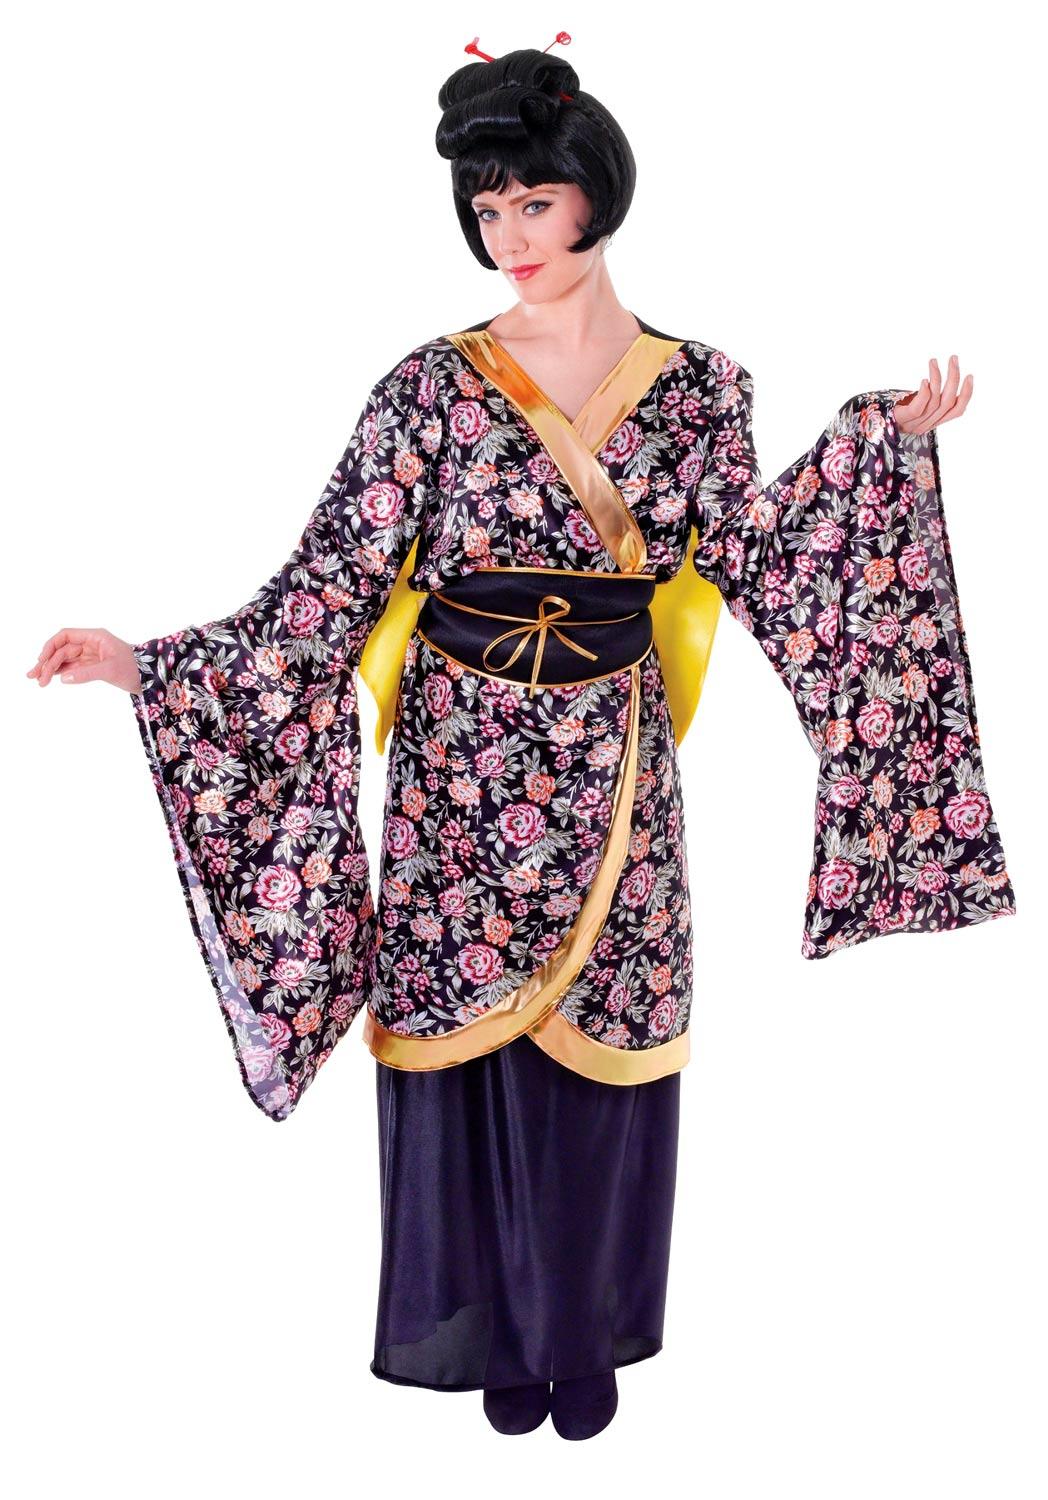 Women's Geisha Costume by Bristol Novelties AC625 available here at Karnival Costumes online party shop